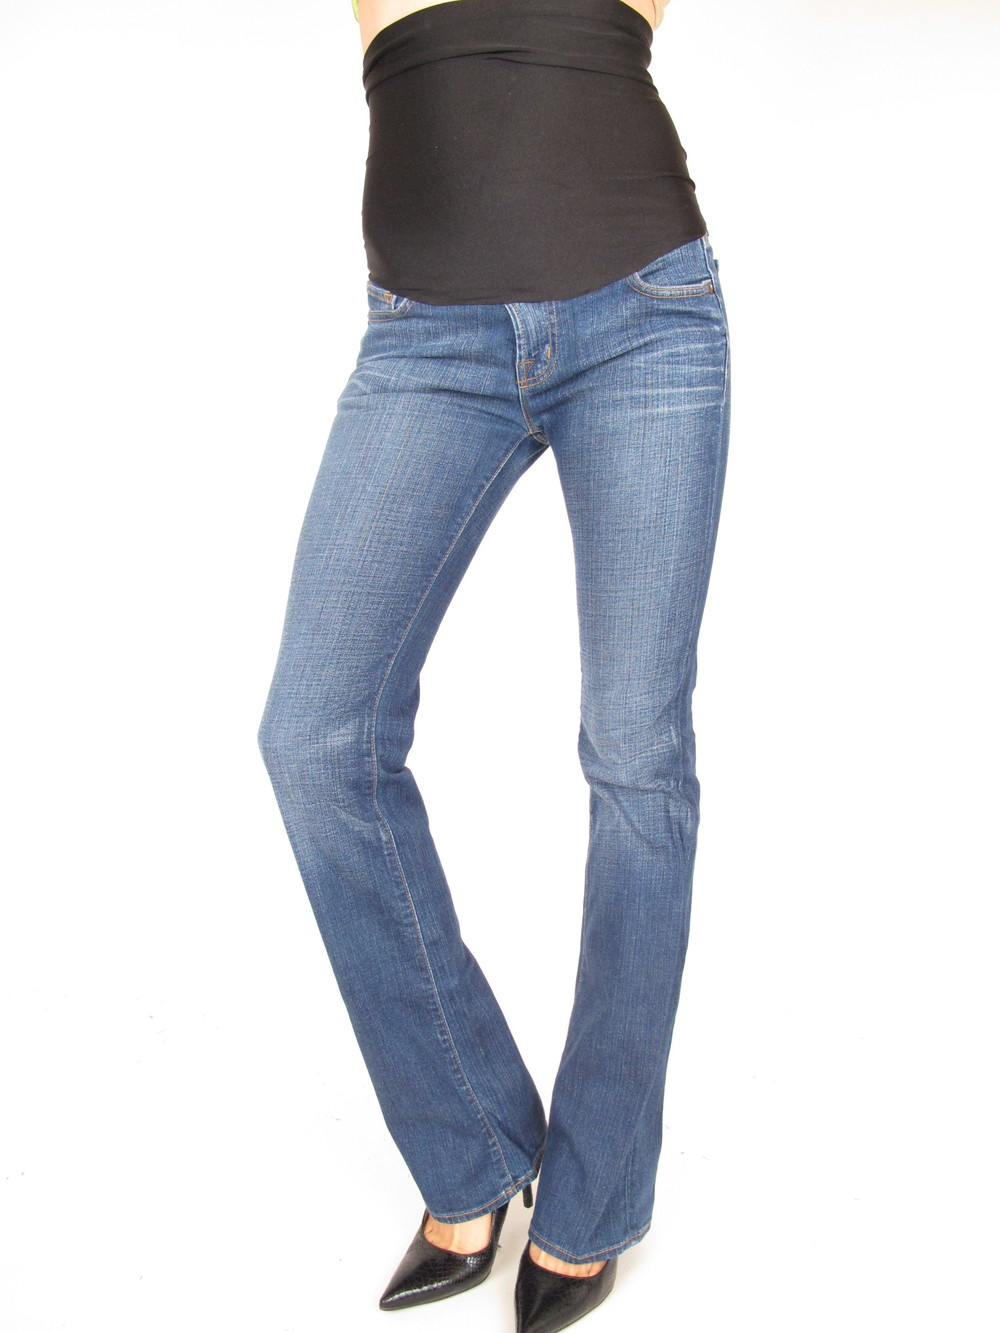 J Brand Bootcut Maternity Jeans 27 x 34 — She & Wolf